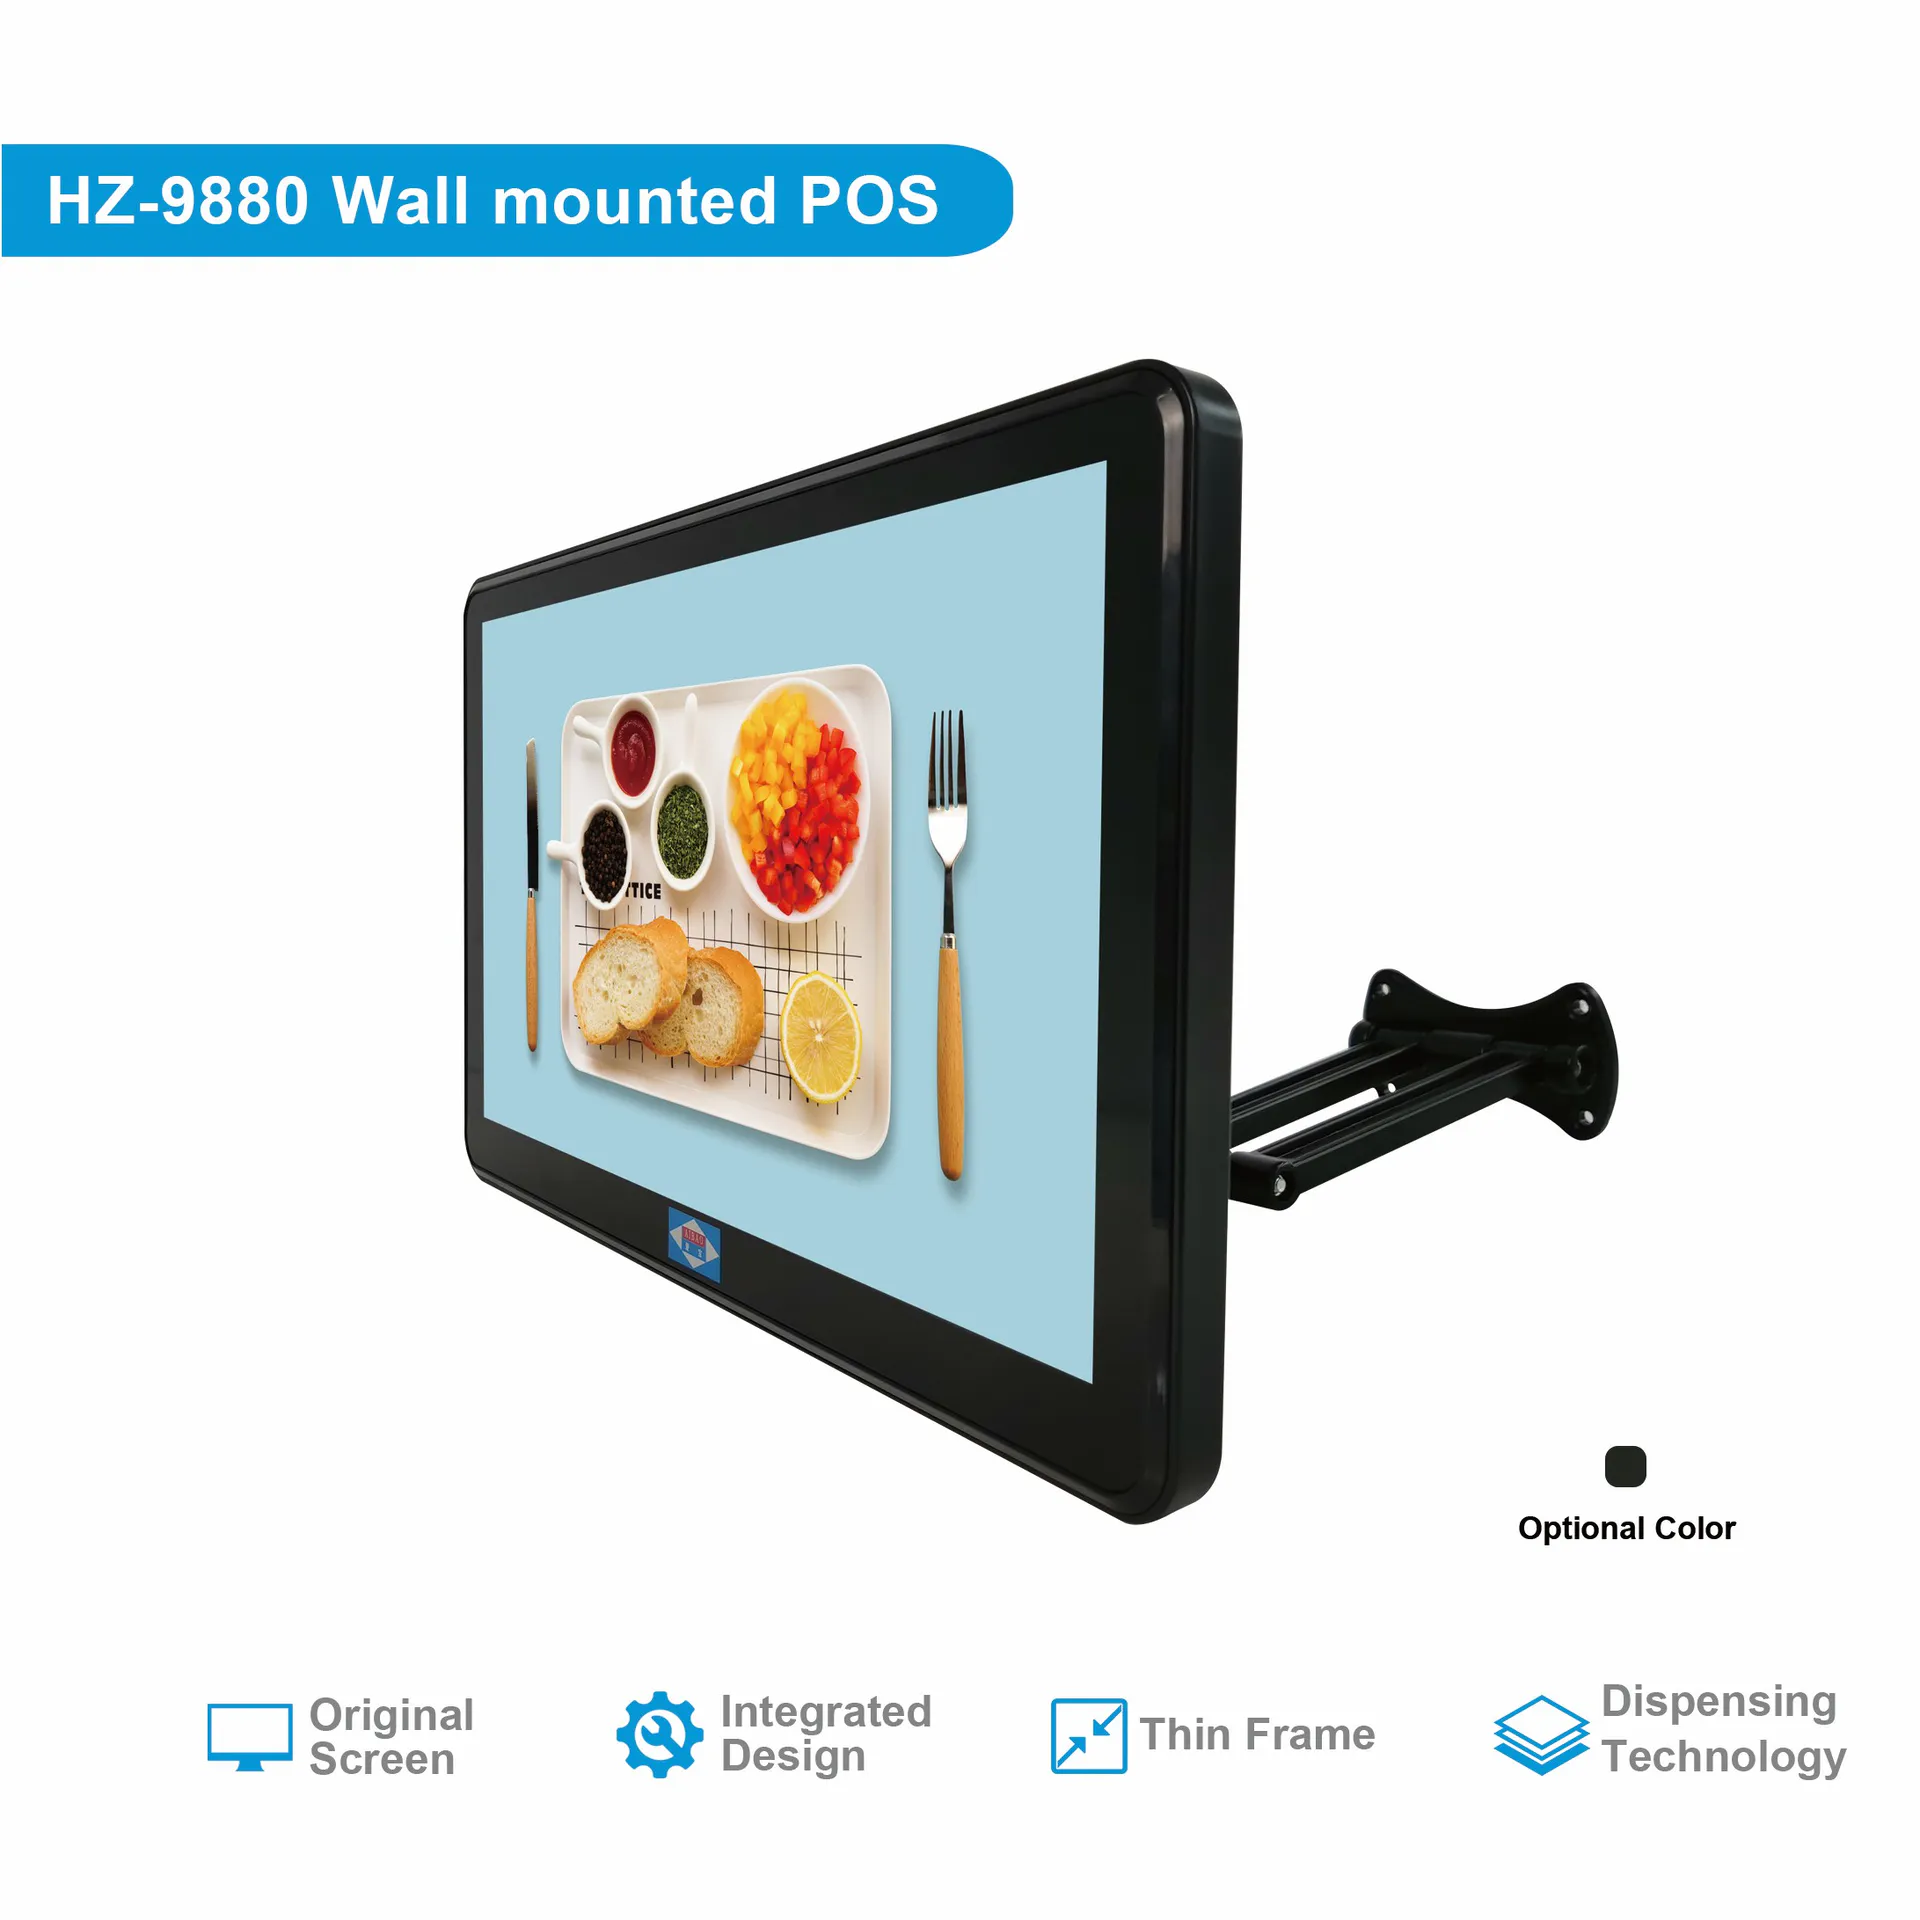 HZ-9880 Wall Mounted POS